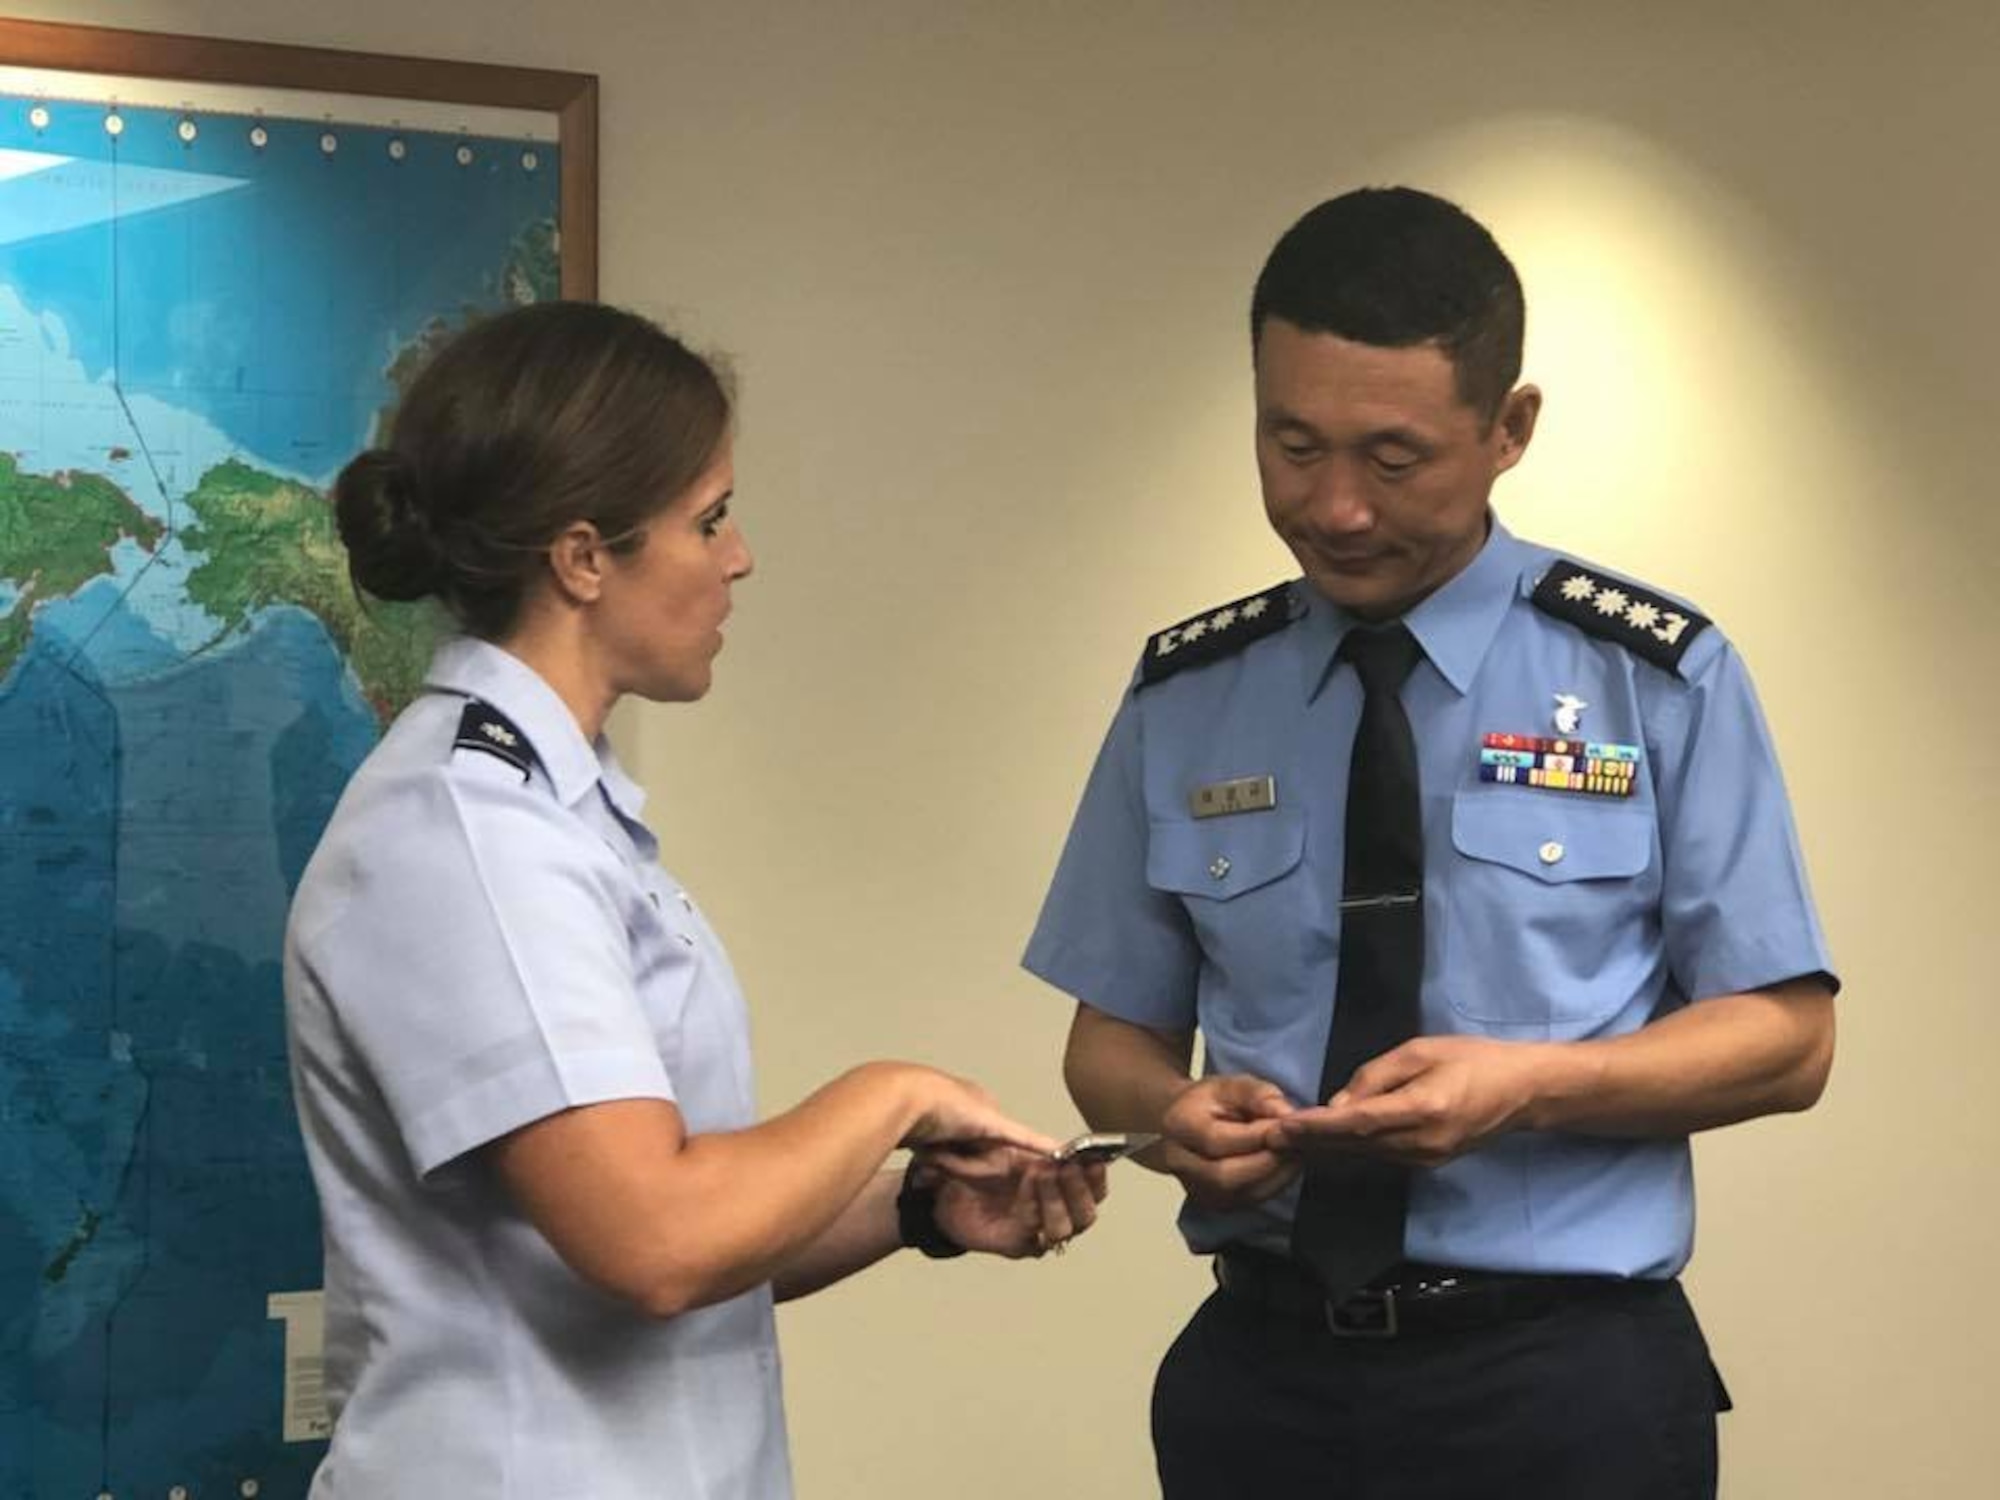 U.S. Air Force Lt. Col. Meagan Schafer exchanges a Pacific Air Forces Public Affairs coin with Republic of Korea Air Force Col. Sang-ky Lee after a meeting aimed at facilitating relationships and dialogue between ROKAF/PA and their U.S. counterparts at Joint Base Pearl Harbor-Hickam, Hawaii Sept. 11, 2018. During the meeting, Lee, also met with professionals from the PACAF/PA, PACAF Band, PACAF Historian, Indo-pacific Command, 7th AF, and the Korean International Affairs Liaison and discussed future ways to engage on the Korean Peninsula. (U.S. Air Force photo by Master Sgt. Nadine Y. Barclay)